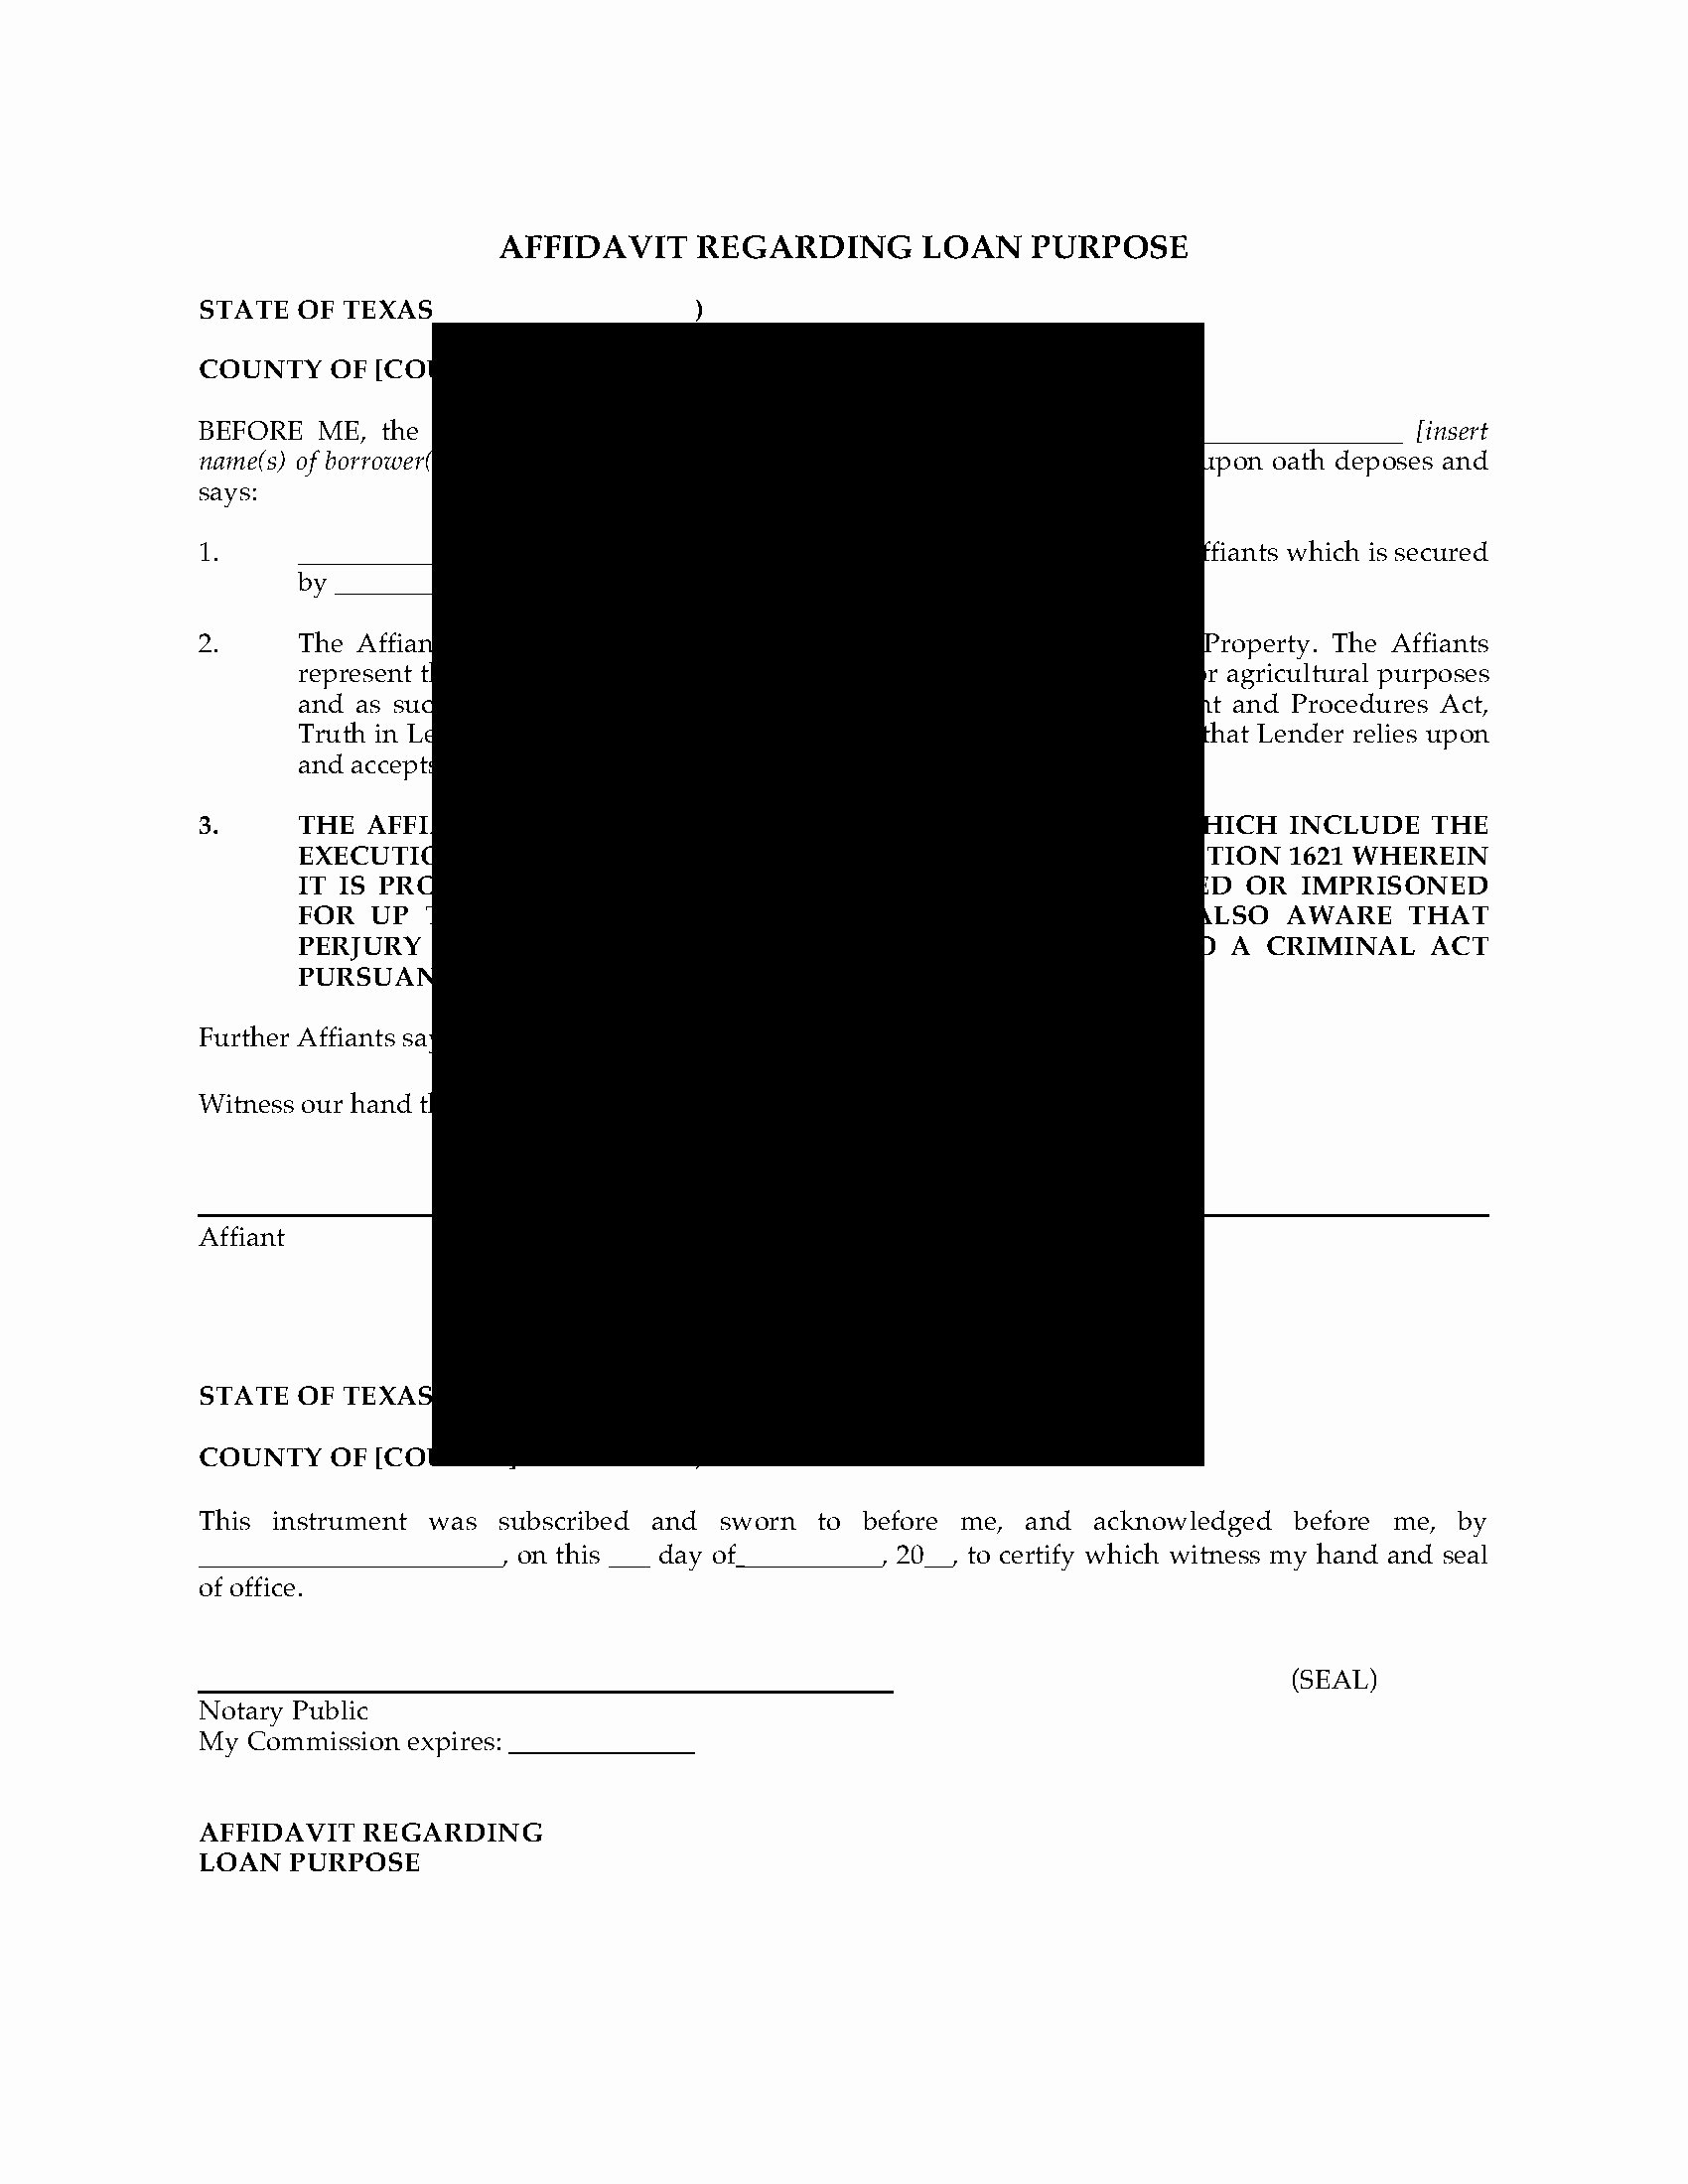 Home Equity Loan Agreement Template Unique Texas Affidavit Re Home Equity Loan Purpose